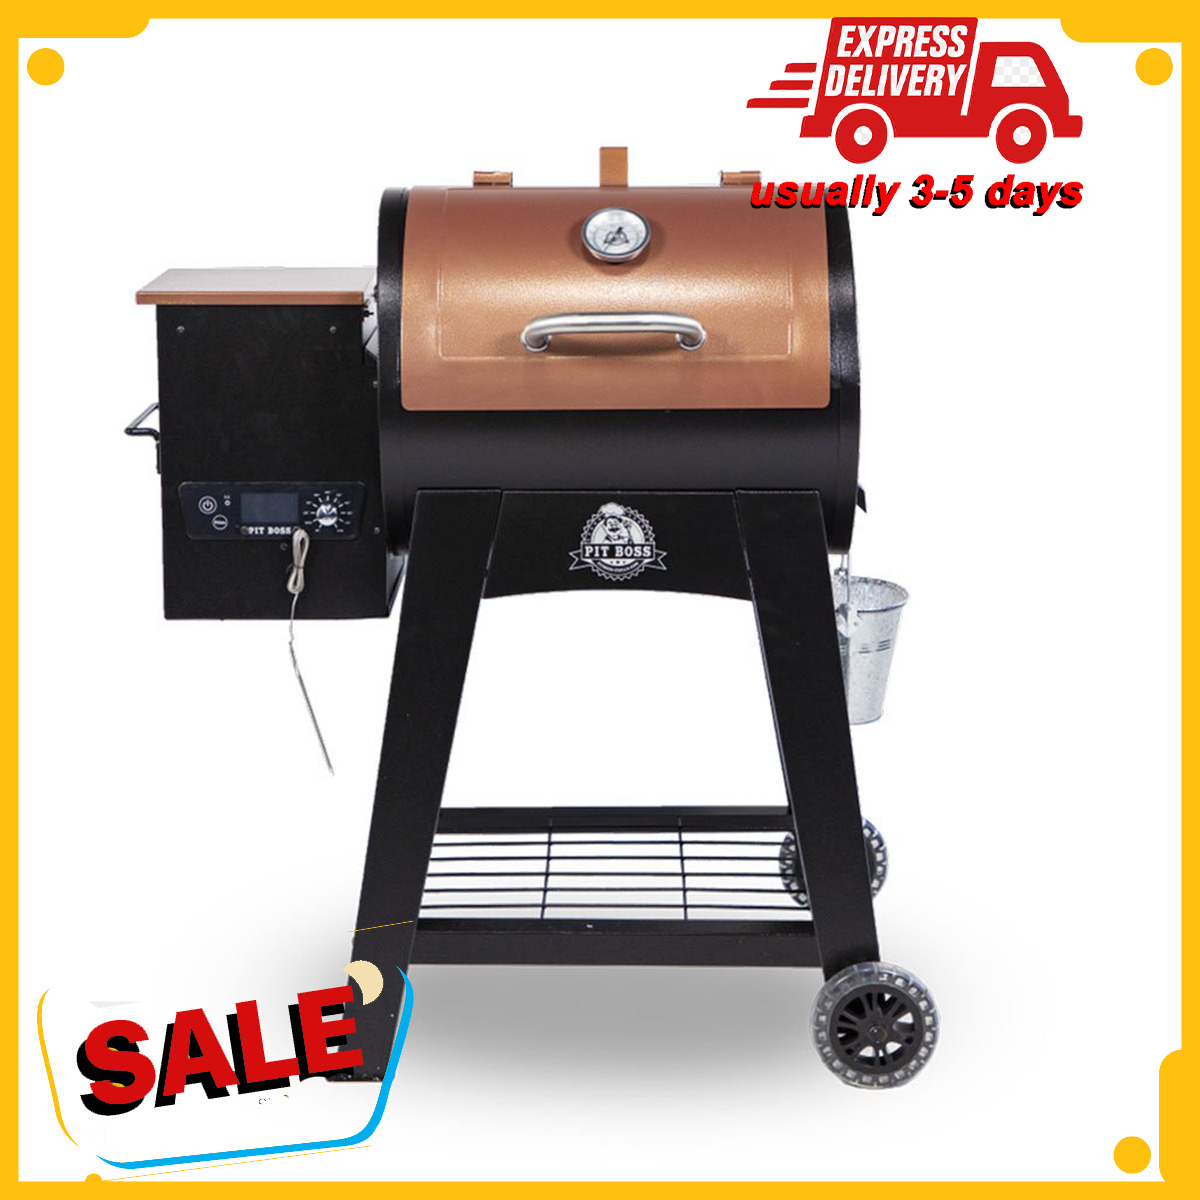 540 sq. in. Pit Boss Lexington Wood Pellet Grill w/ Flame Broiler and Meat Probe